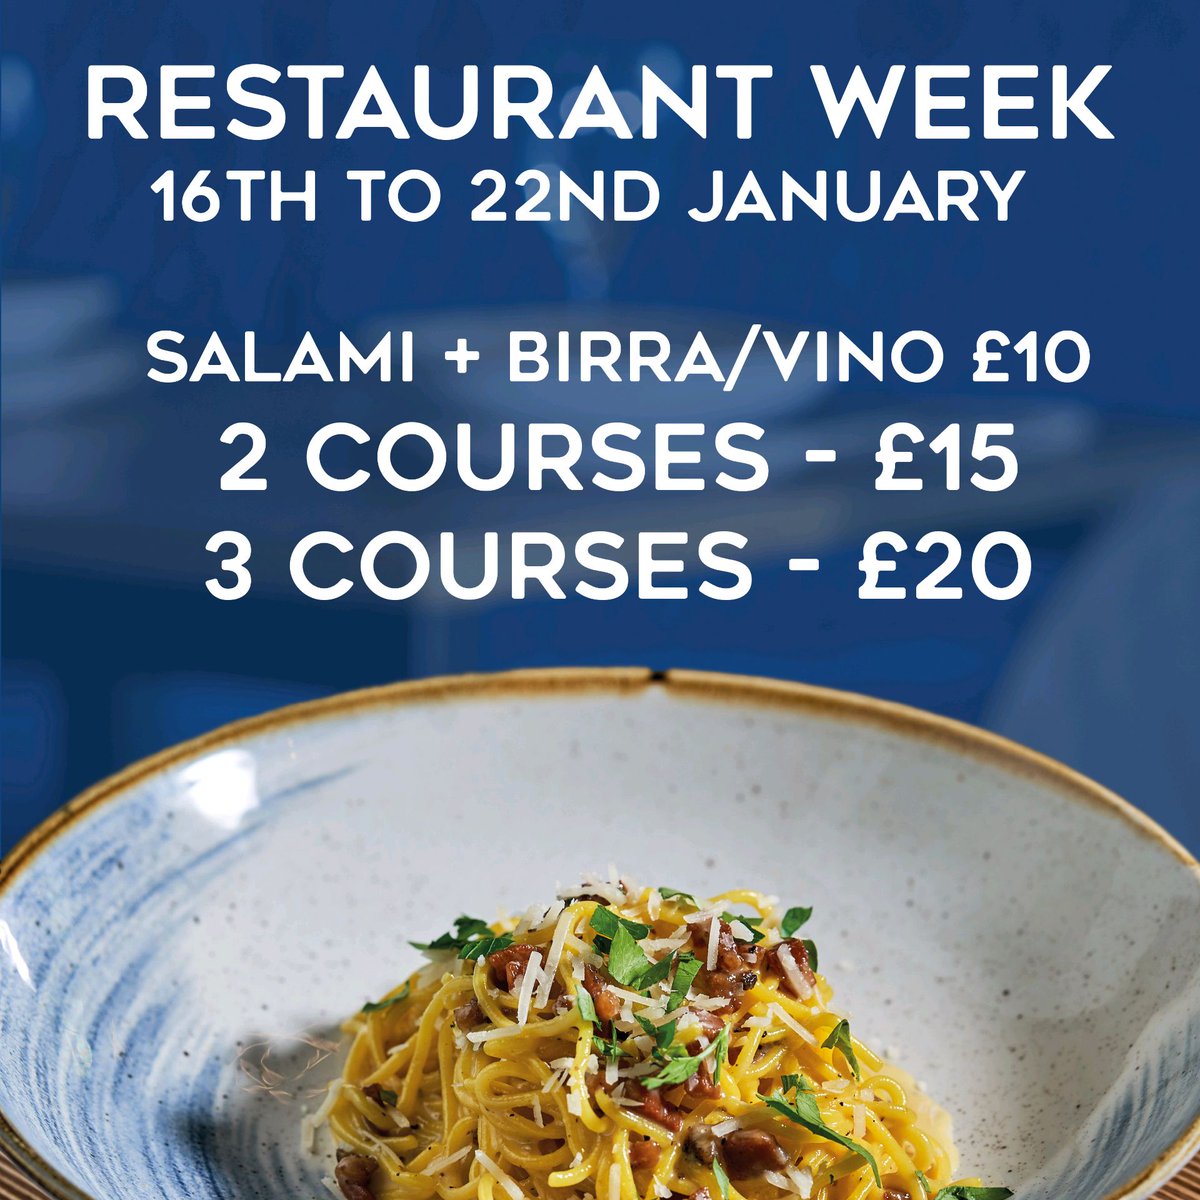 Restaurant Week is here with something every day of the week.

Booking advised to avoid disappointment. Visit puntoitalian.co.uk to book your table now.

#restaurantweek #italianfood #foodies #restaurantdeals #localbusiness #pizza #pasta